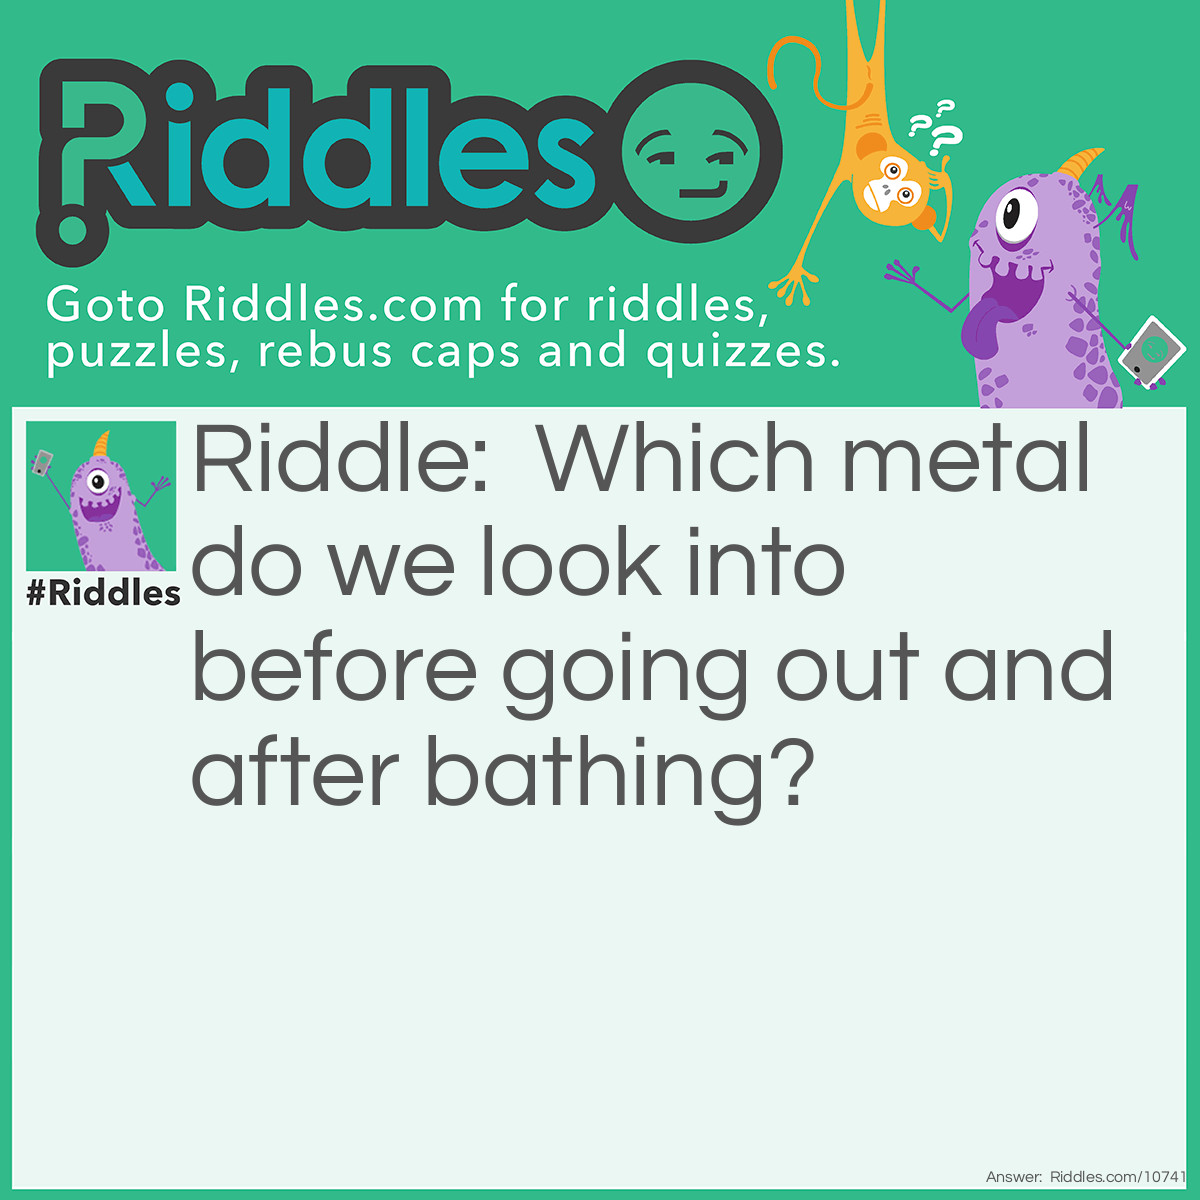 Riddle: Which metal do we look into before going out and after bathing? Answer: Silver (Mirror).